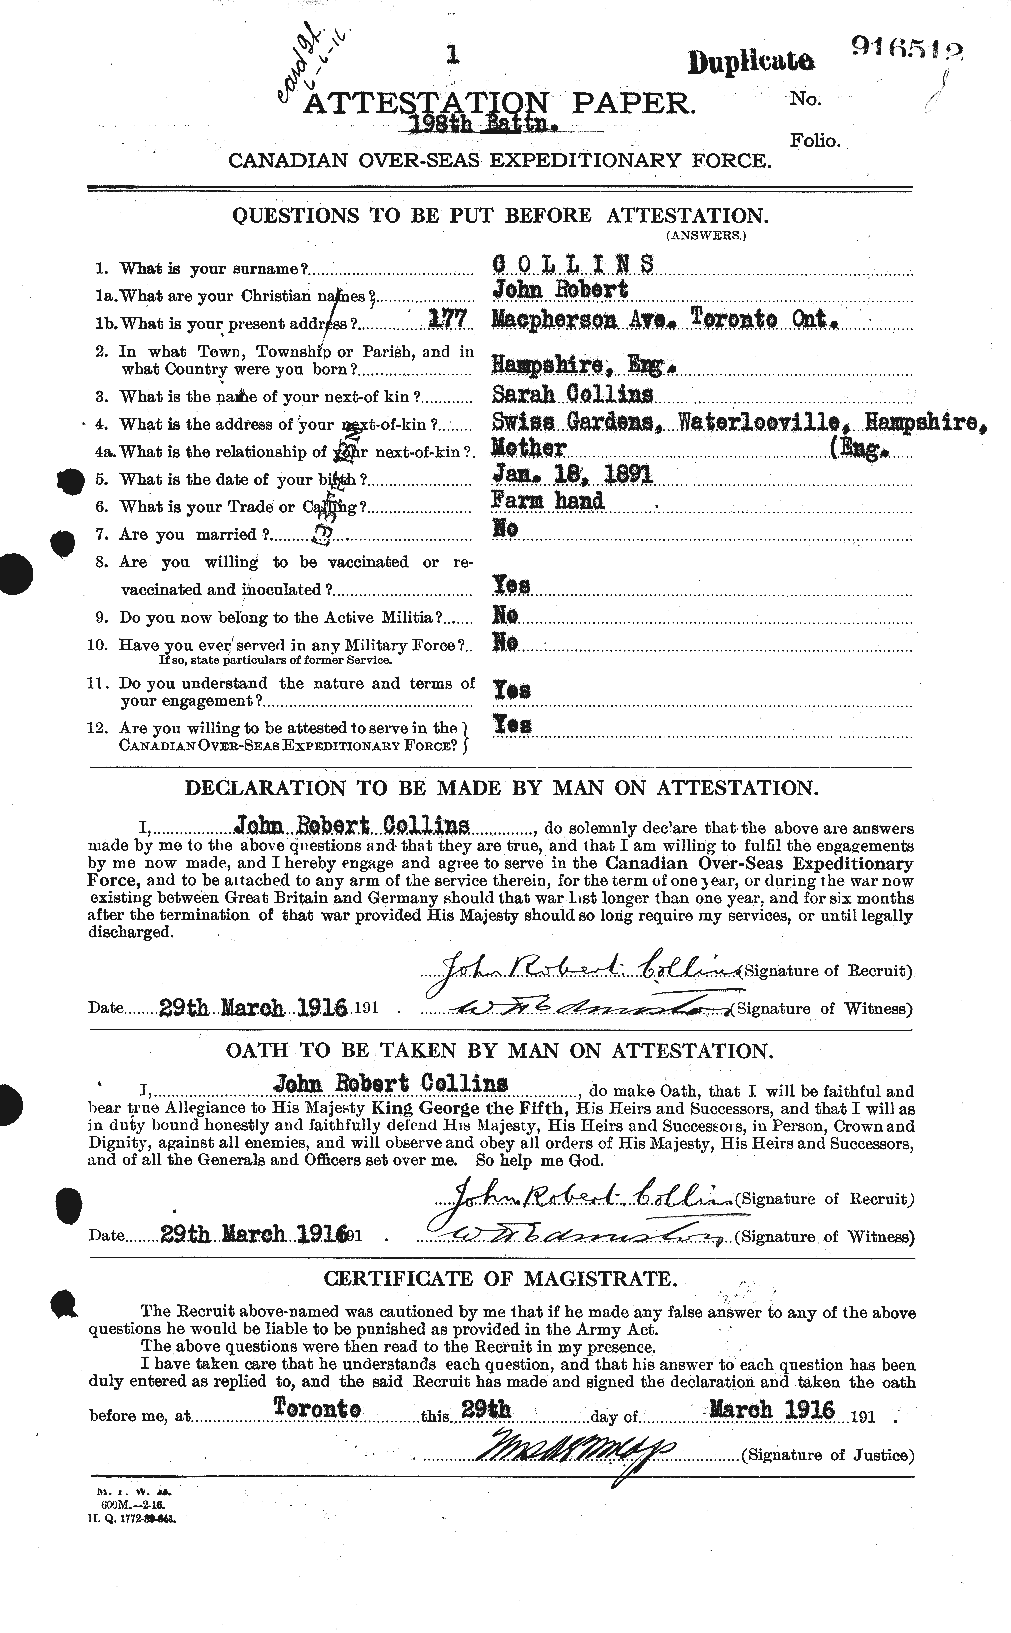 Personnel Records of the First World War - CEF 069537a